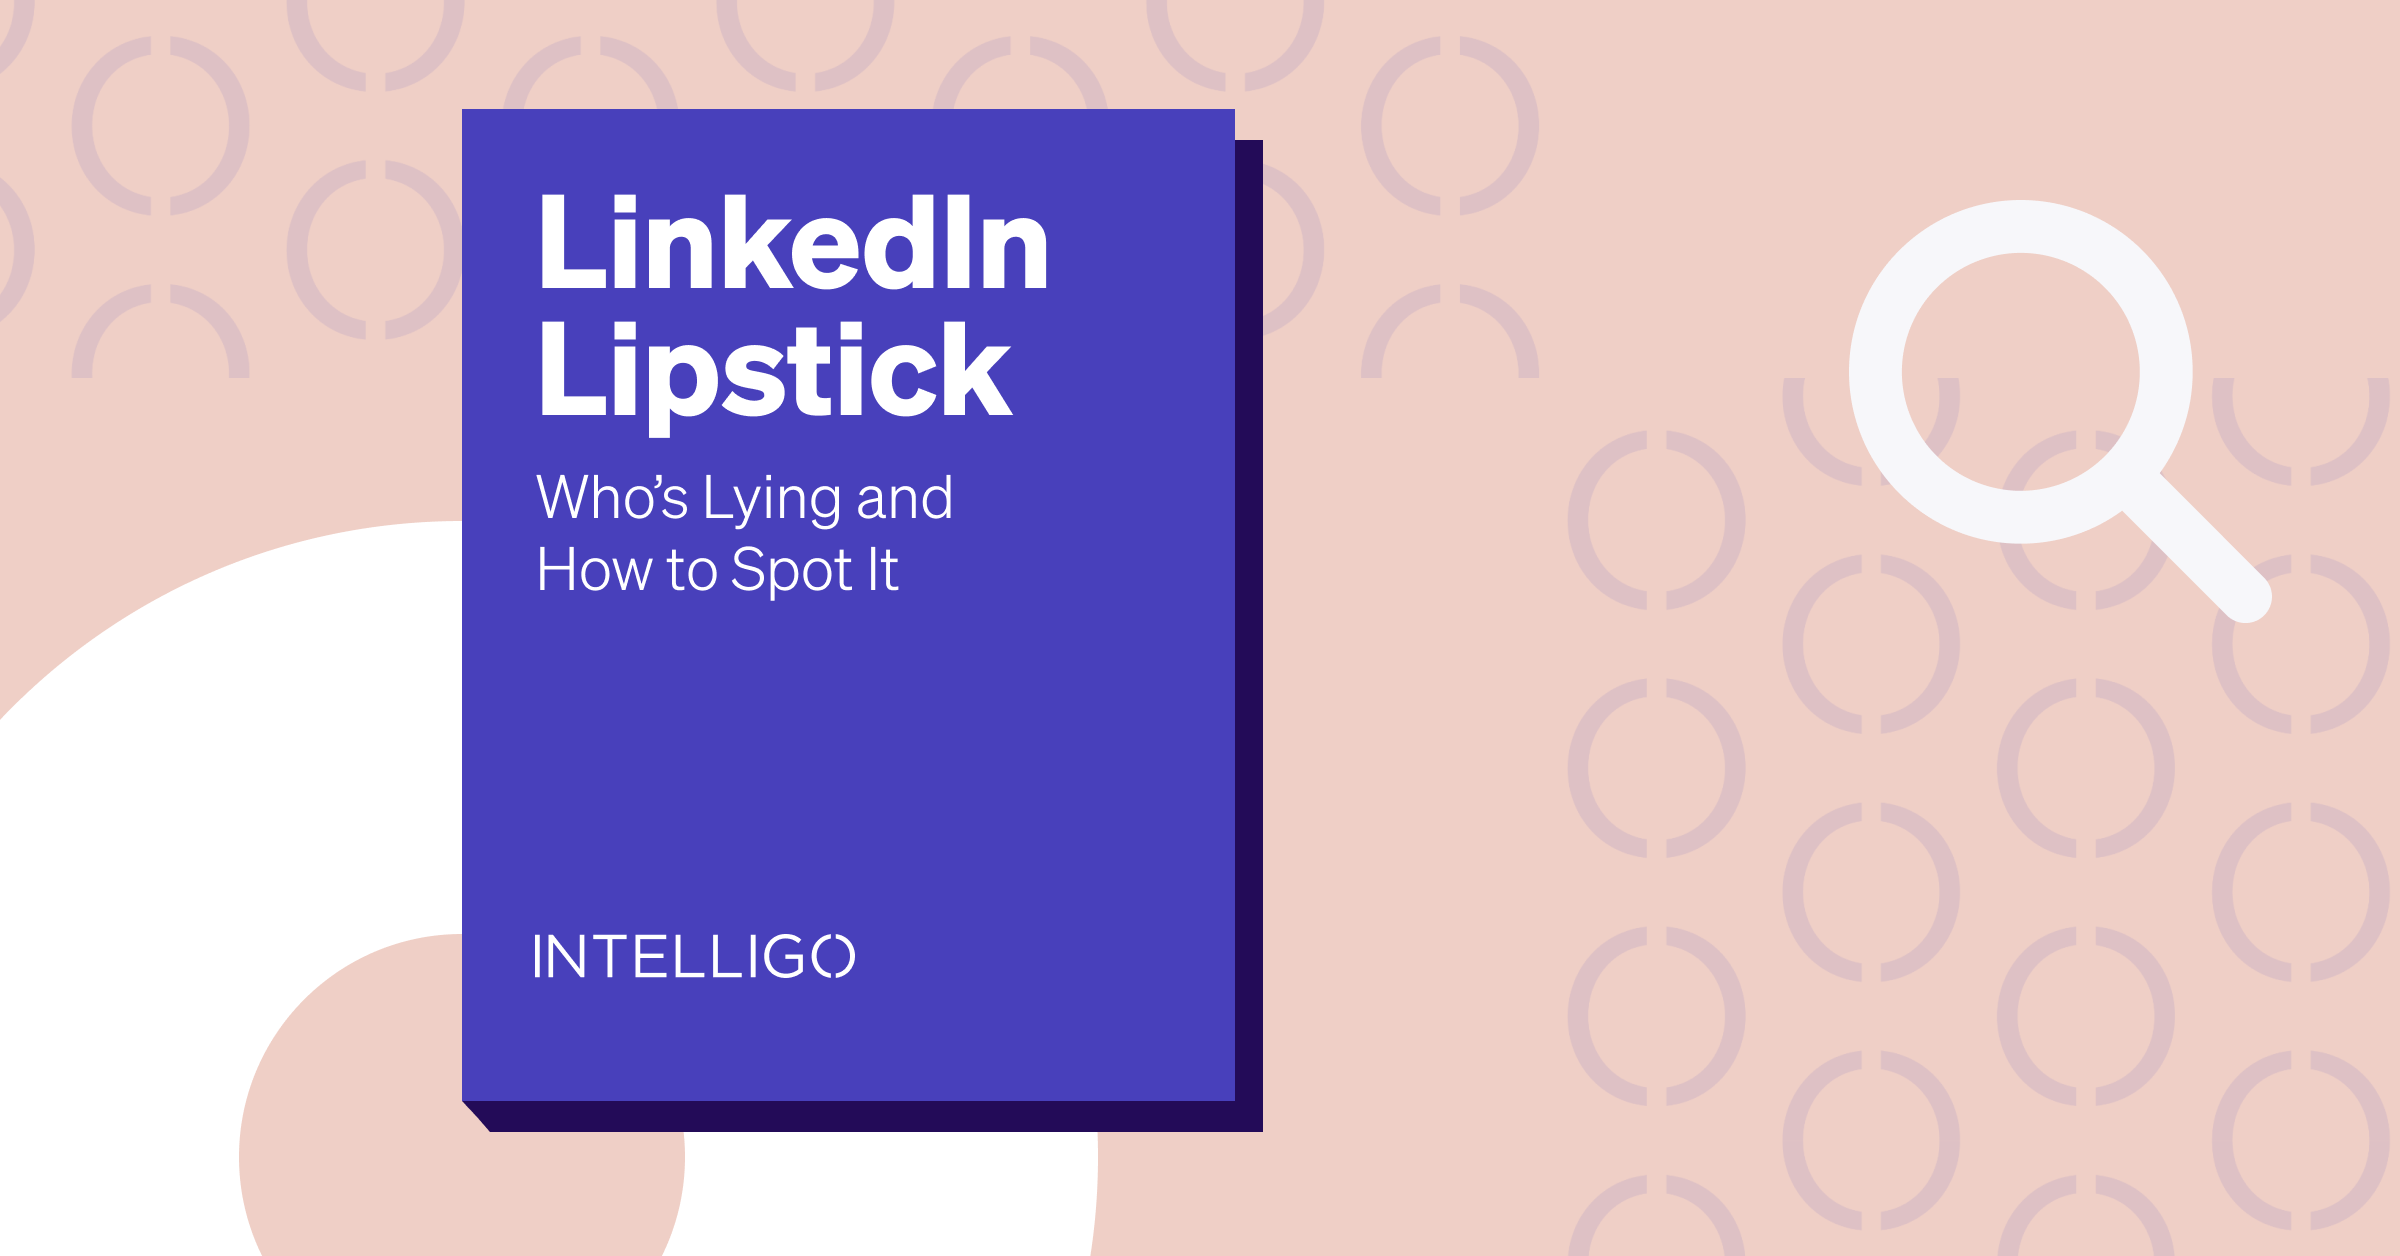 LinkedIn Lipstick – Who’s Lying and How to Spot It